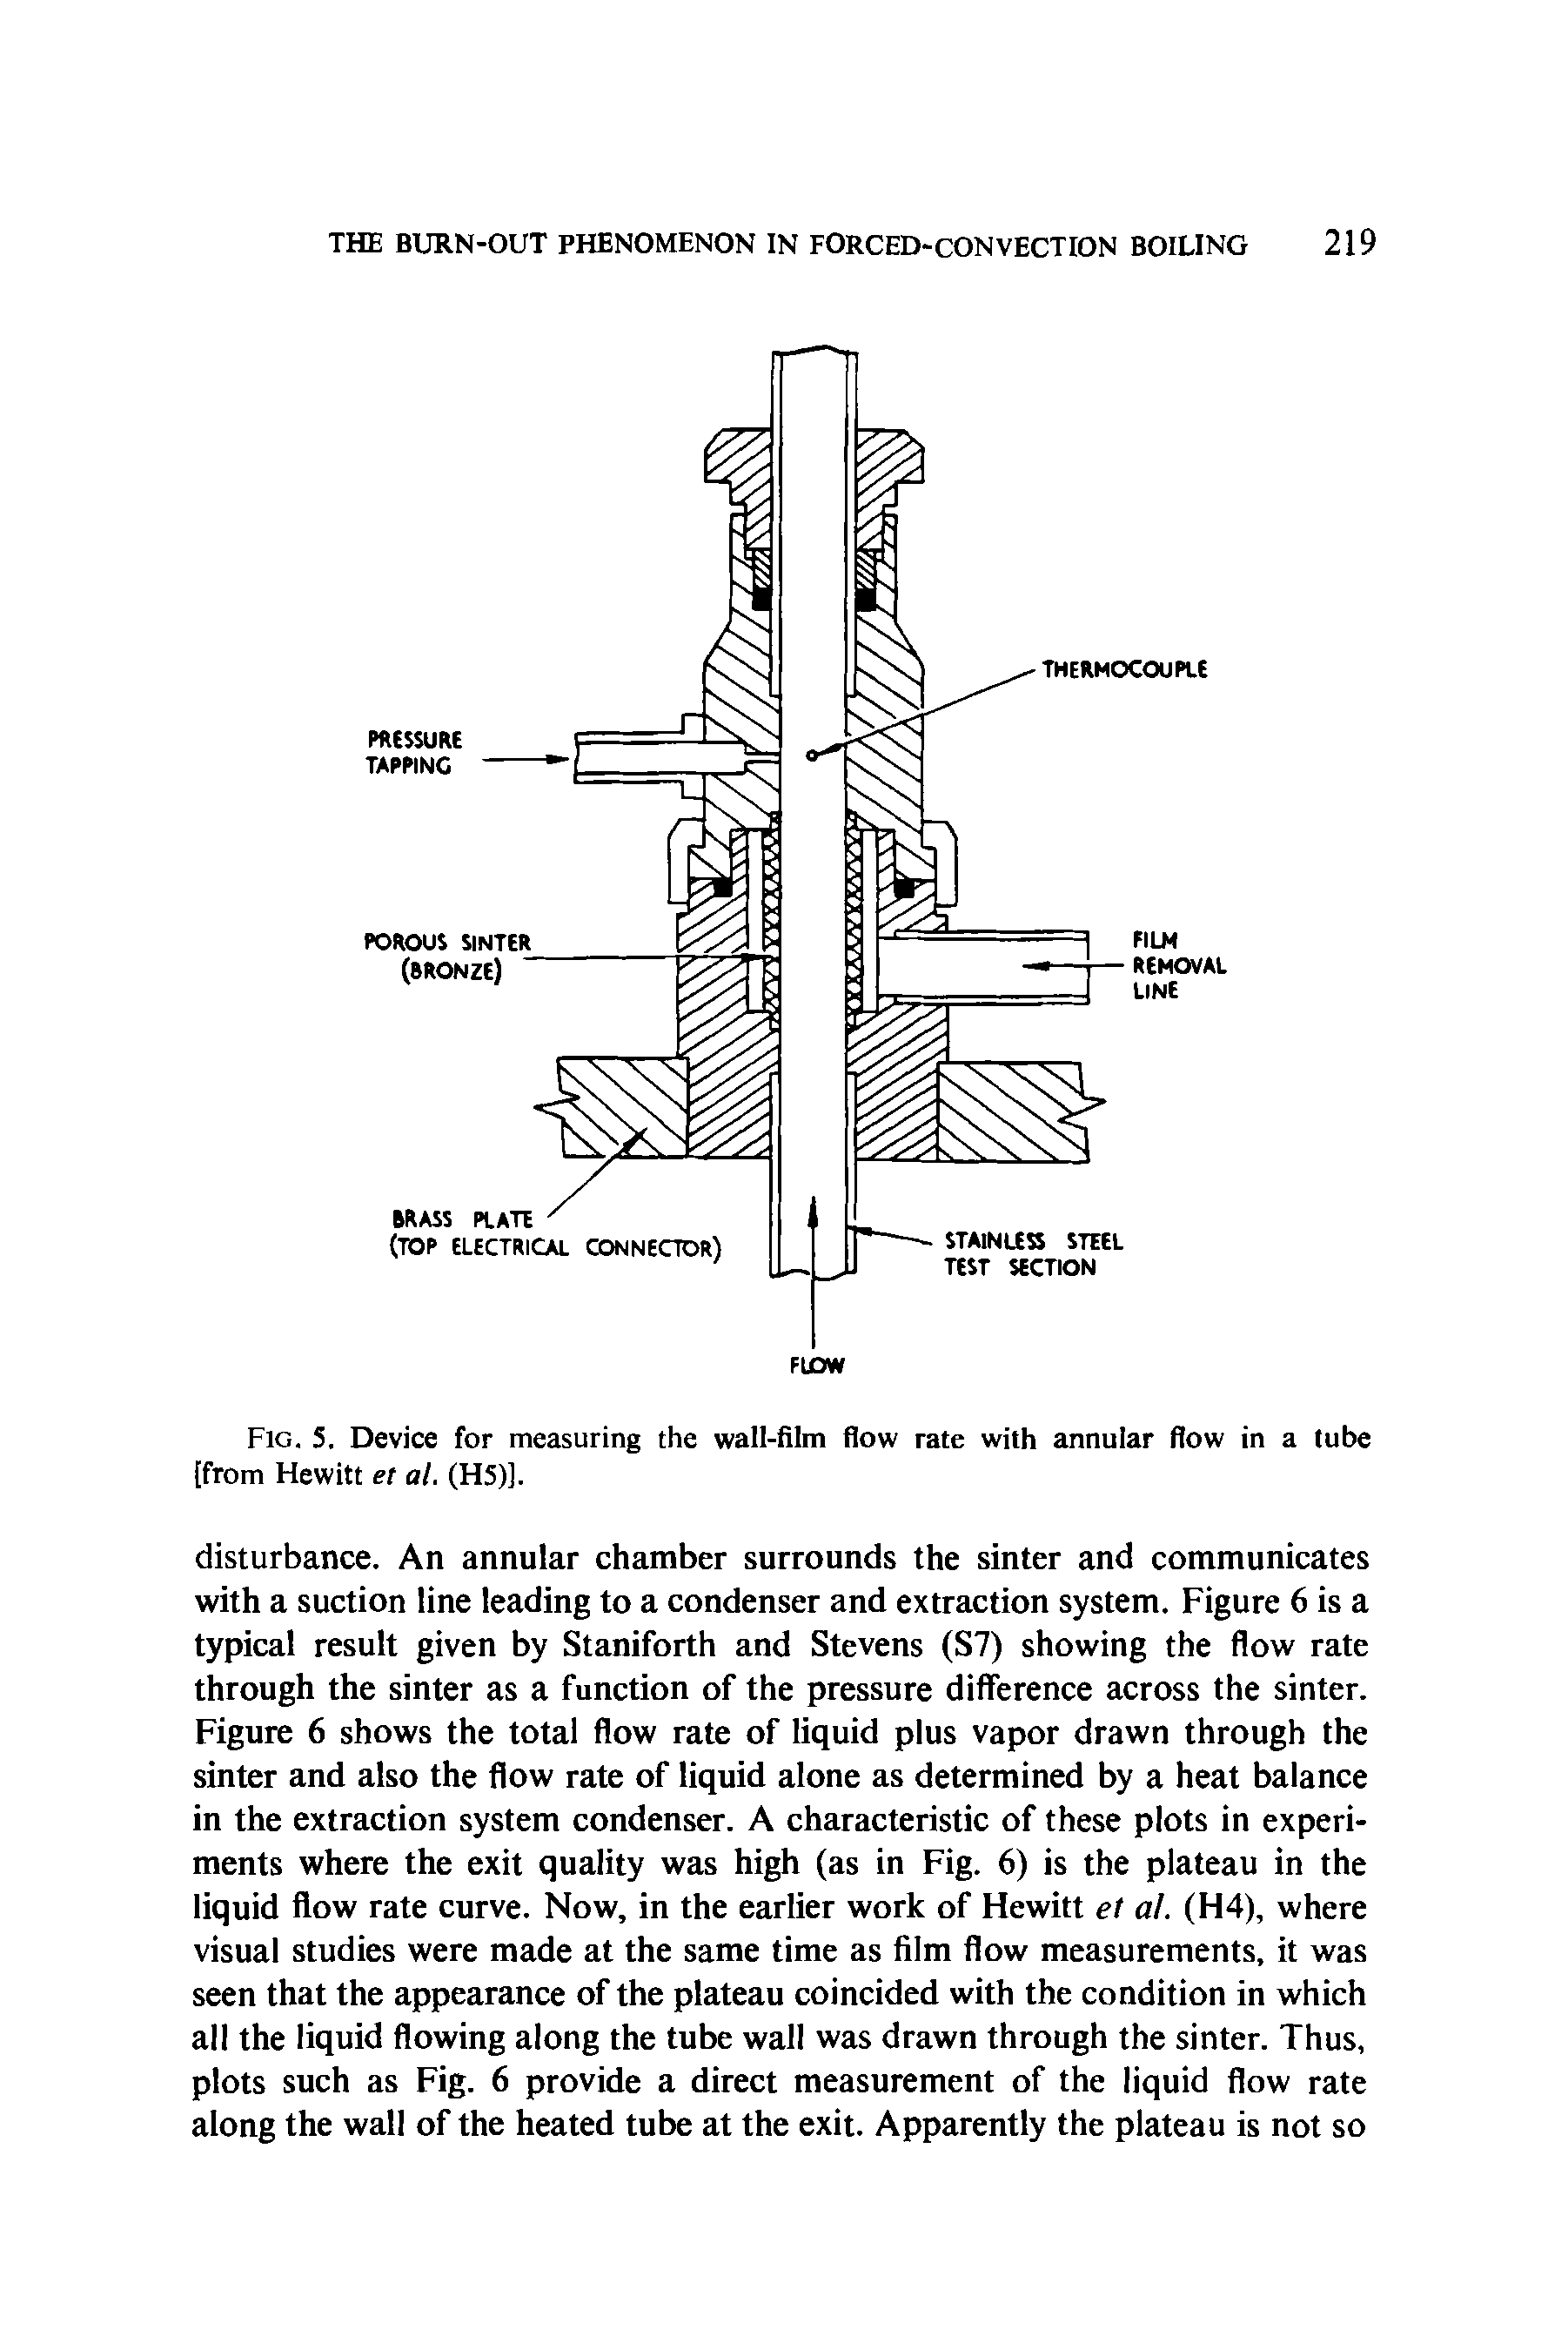 Fig. 5. Device for measuring the wall-film flow rate with annular flow in a tube [from Hewitt et al. (H5)].